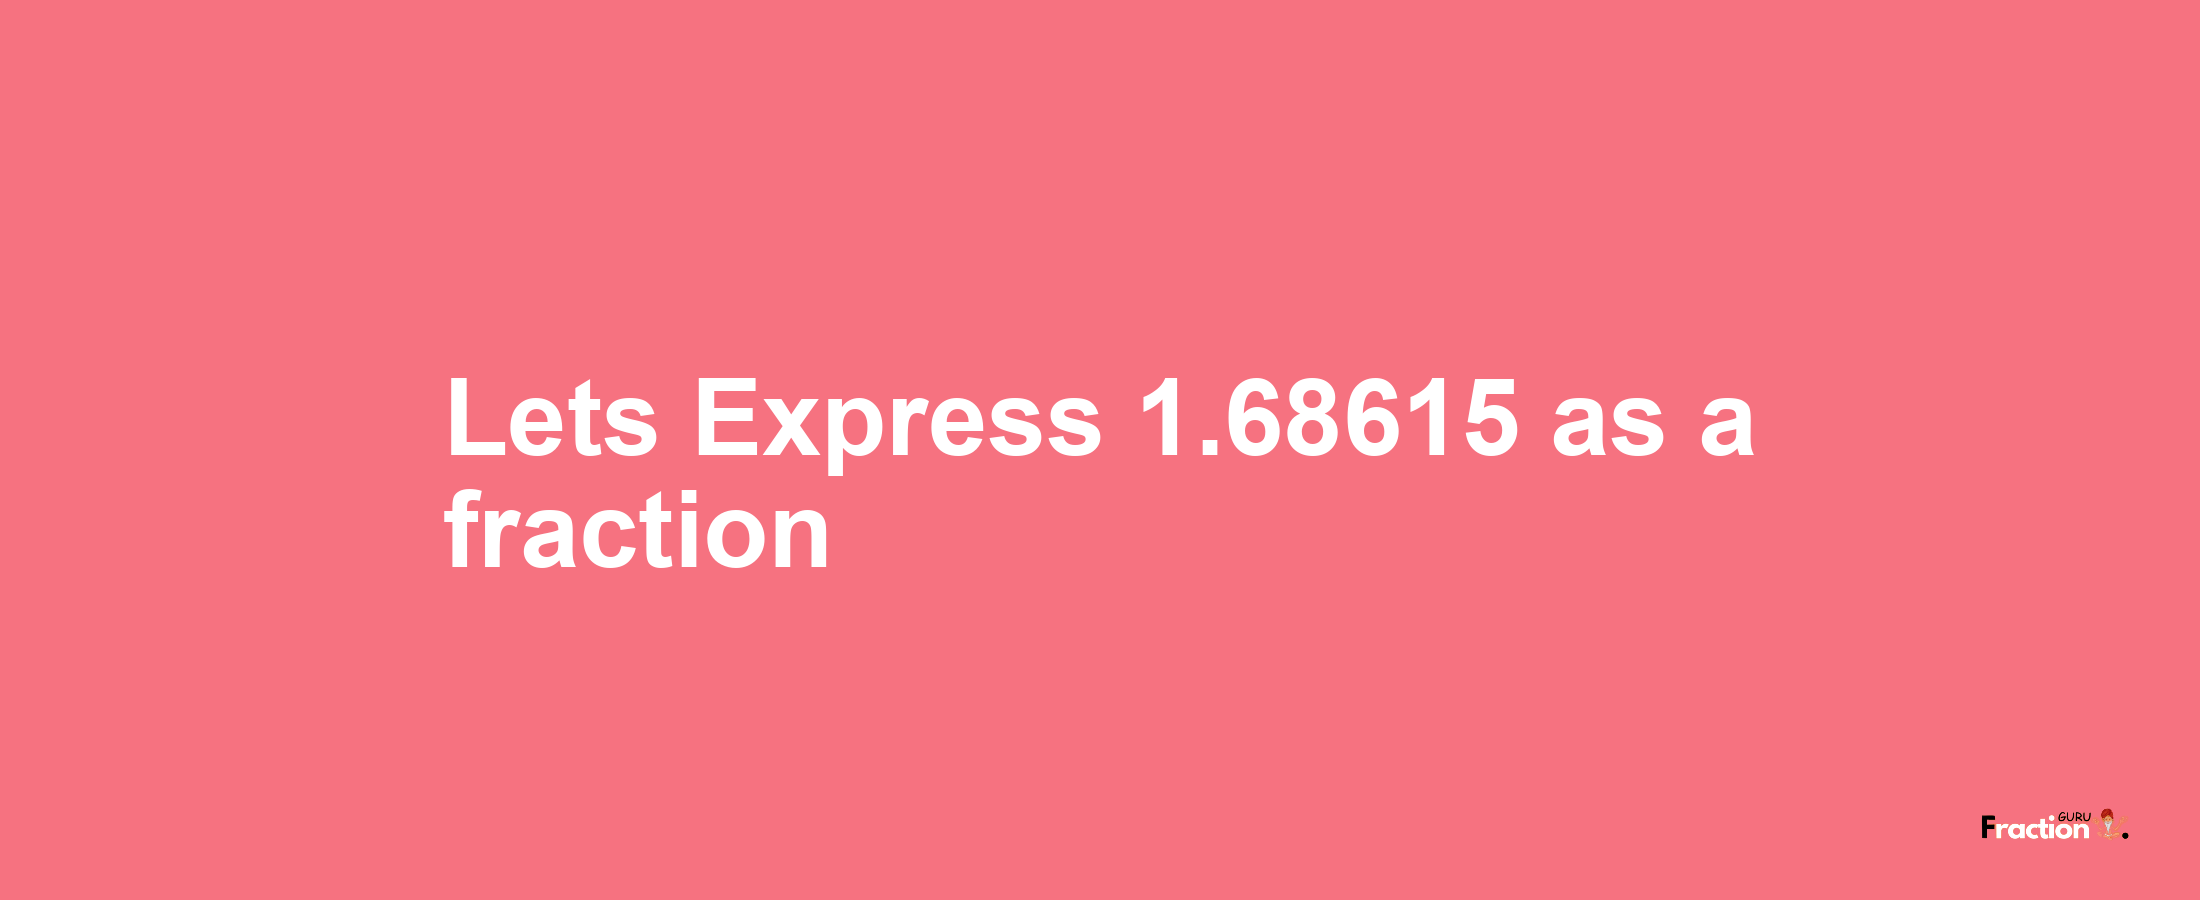 Lets Express 1.68615 as afraction